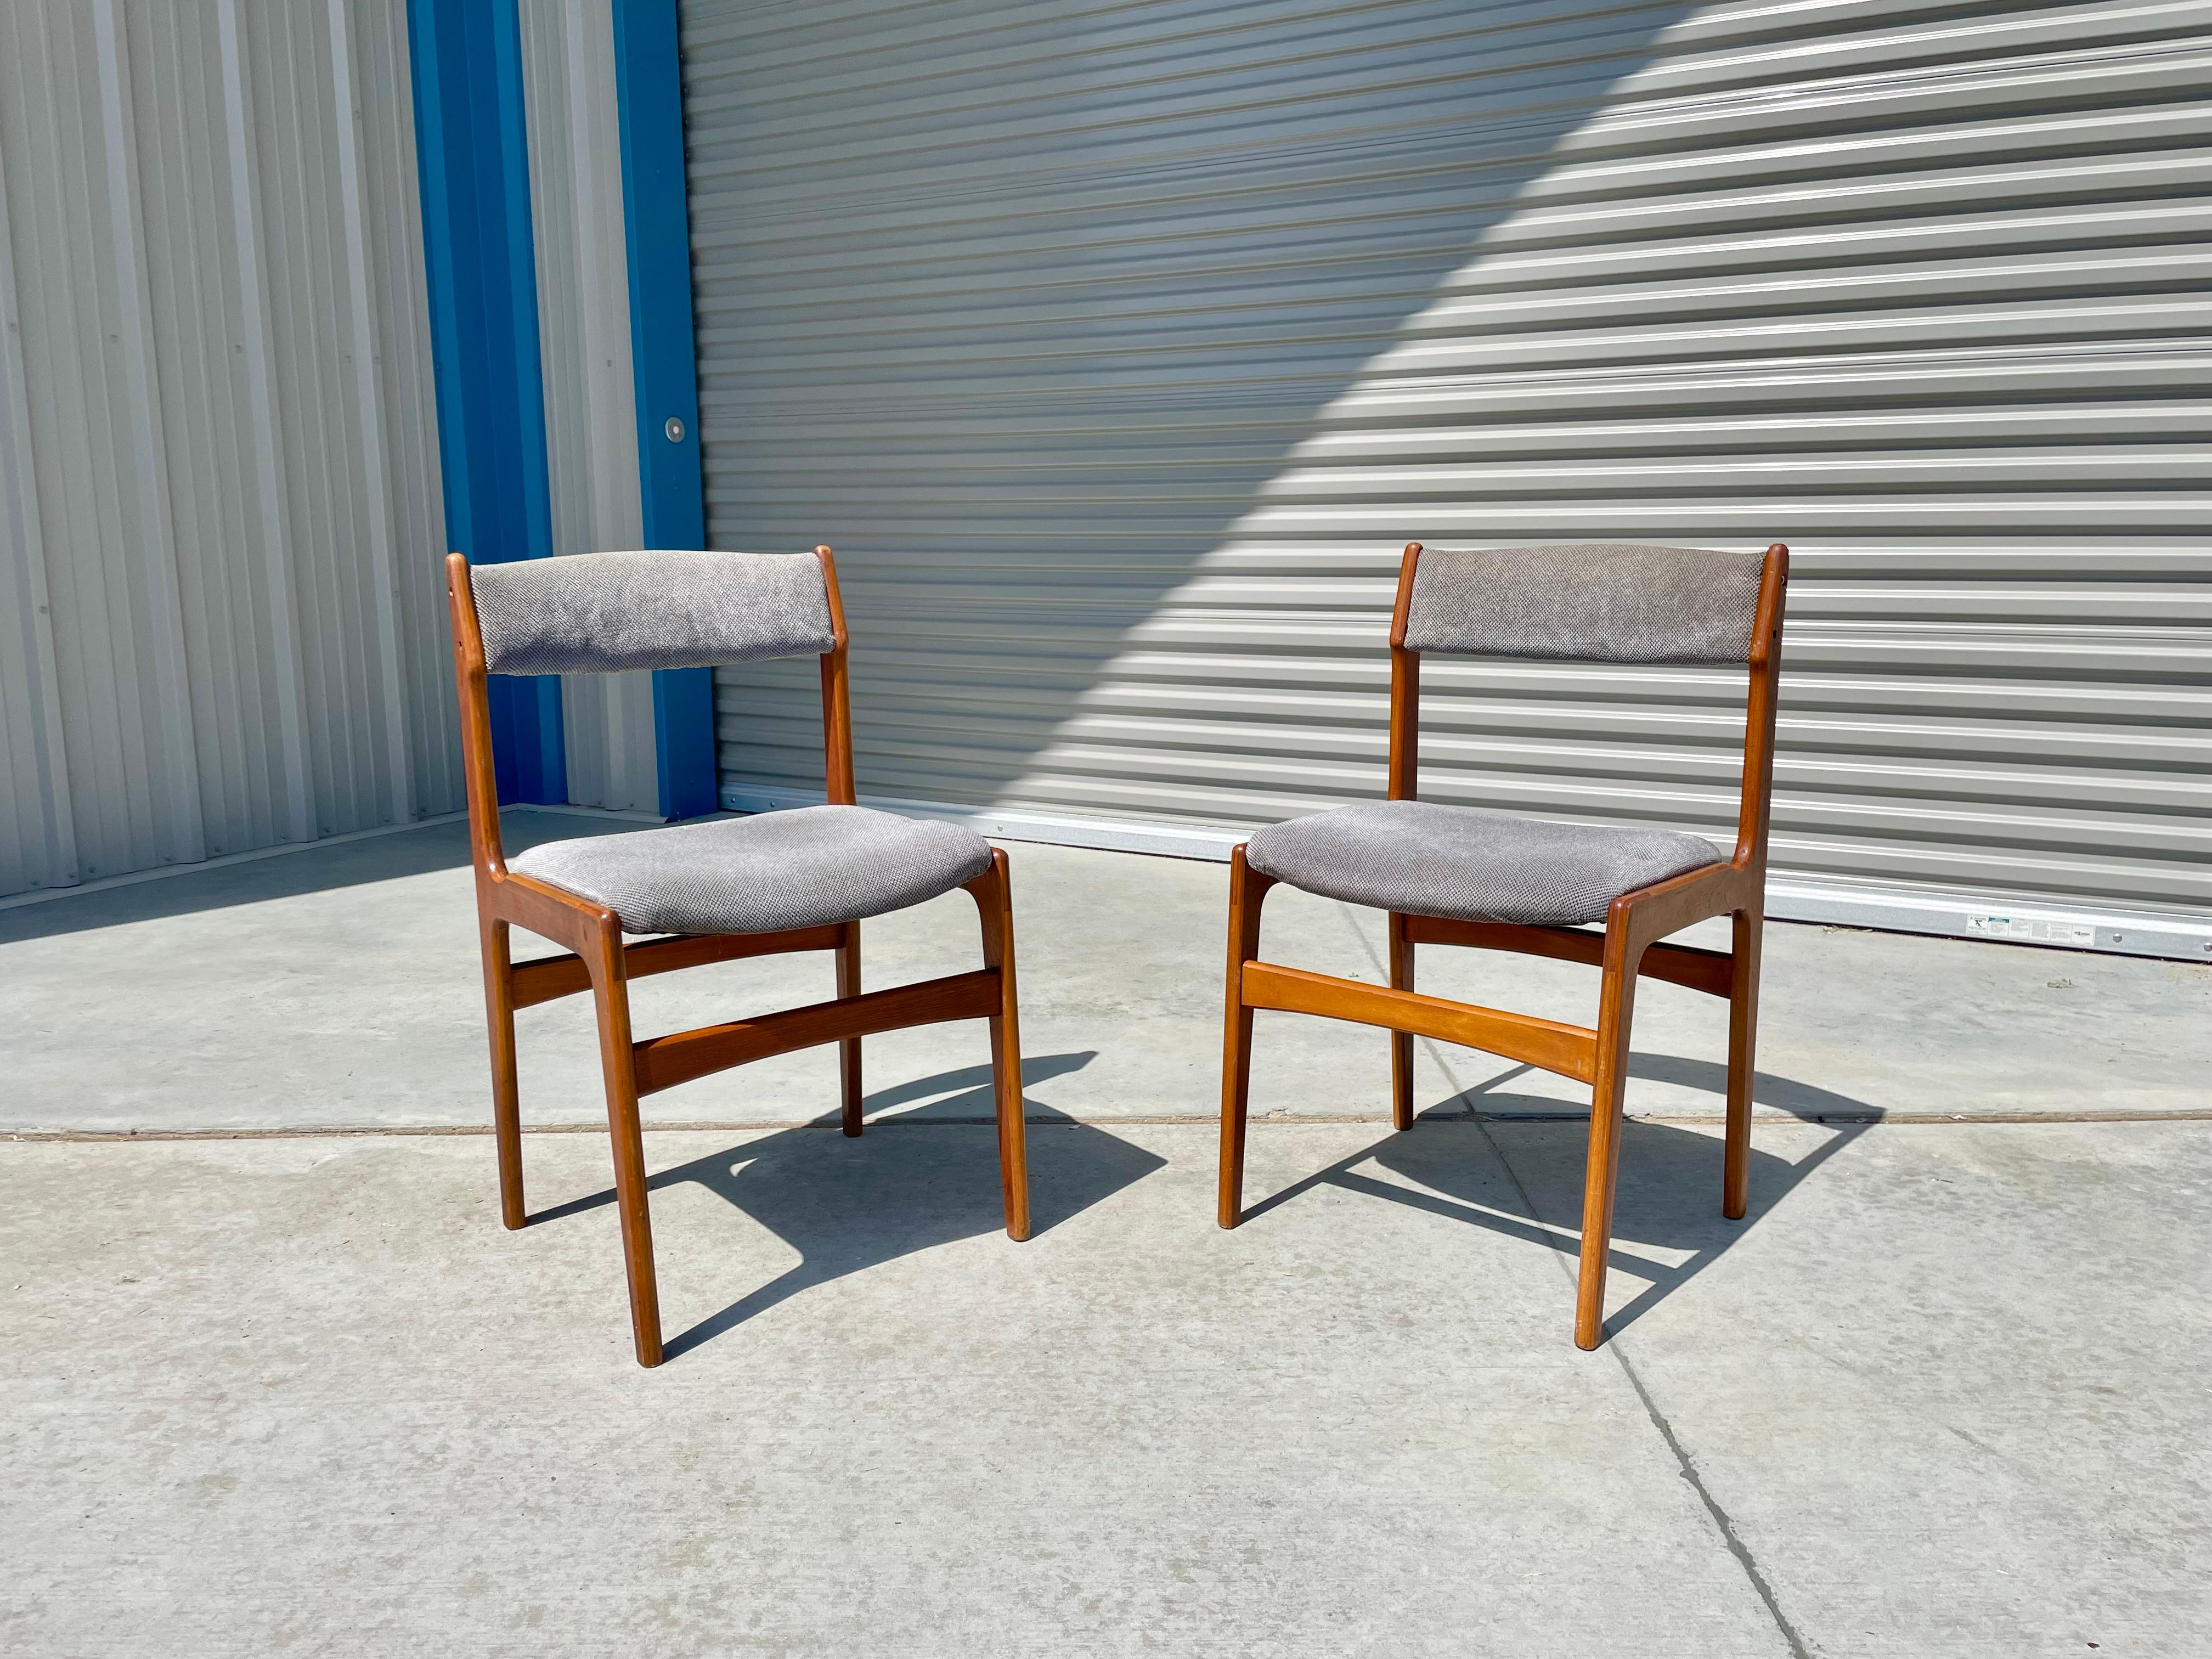 1960s Danish Modern Teak Dining Chairs - Set of 6 For Sale 1